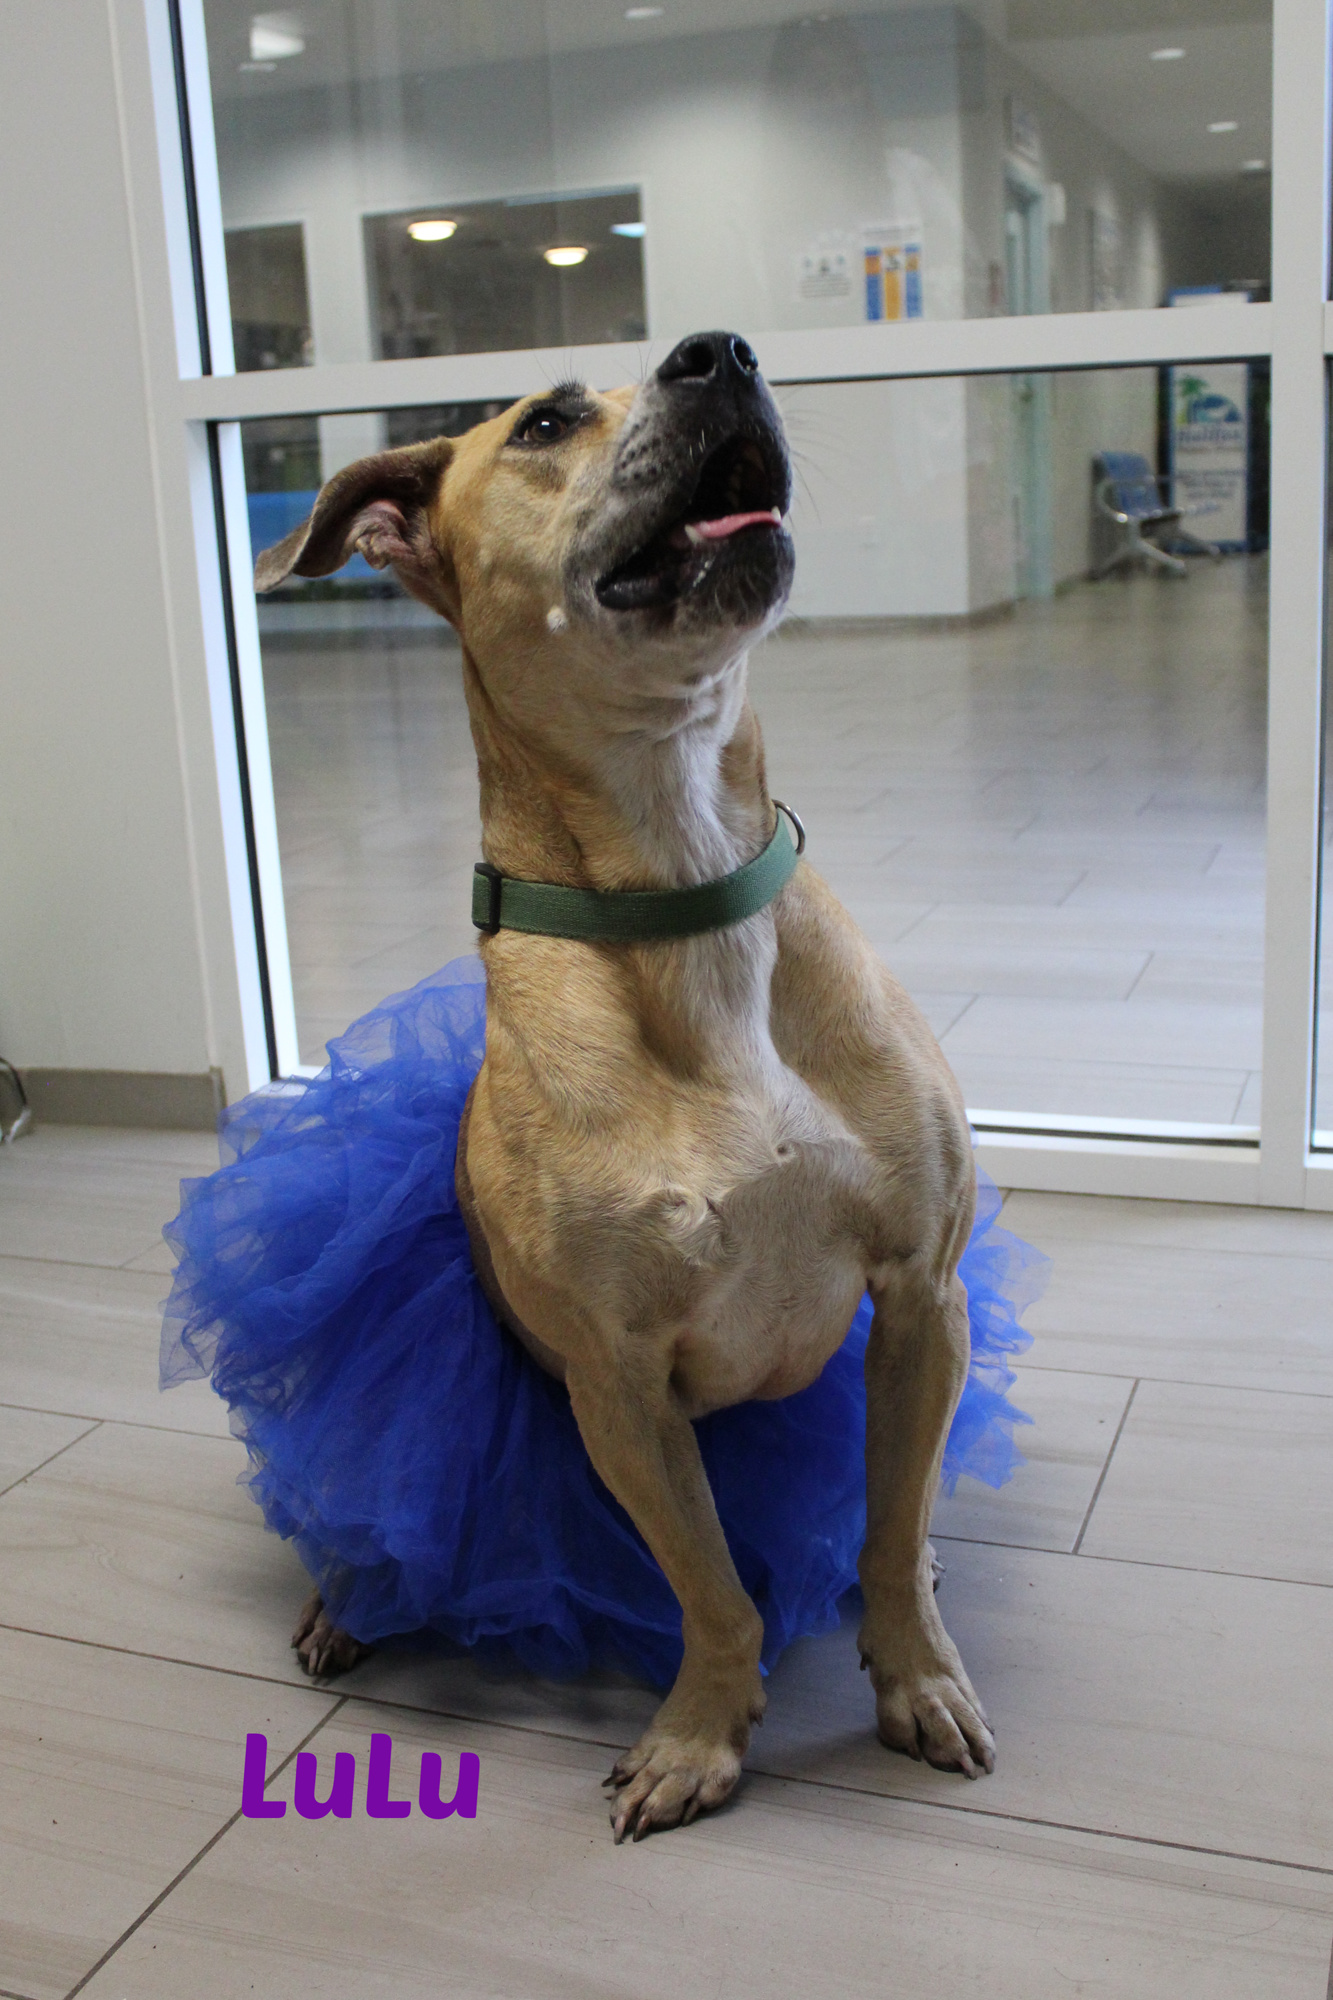 LuLu is ready to have a ball in a new forever home. Courtesy photo